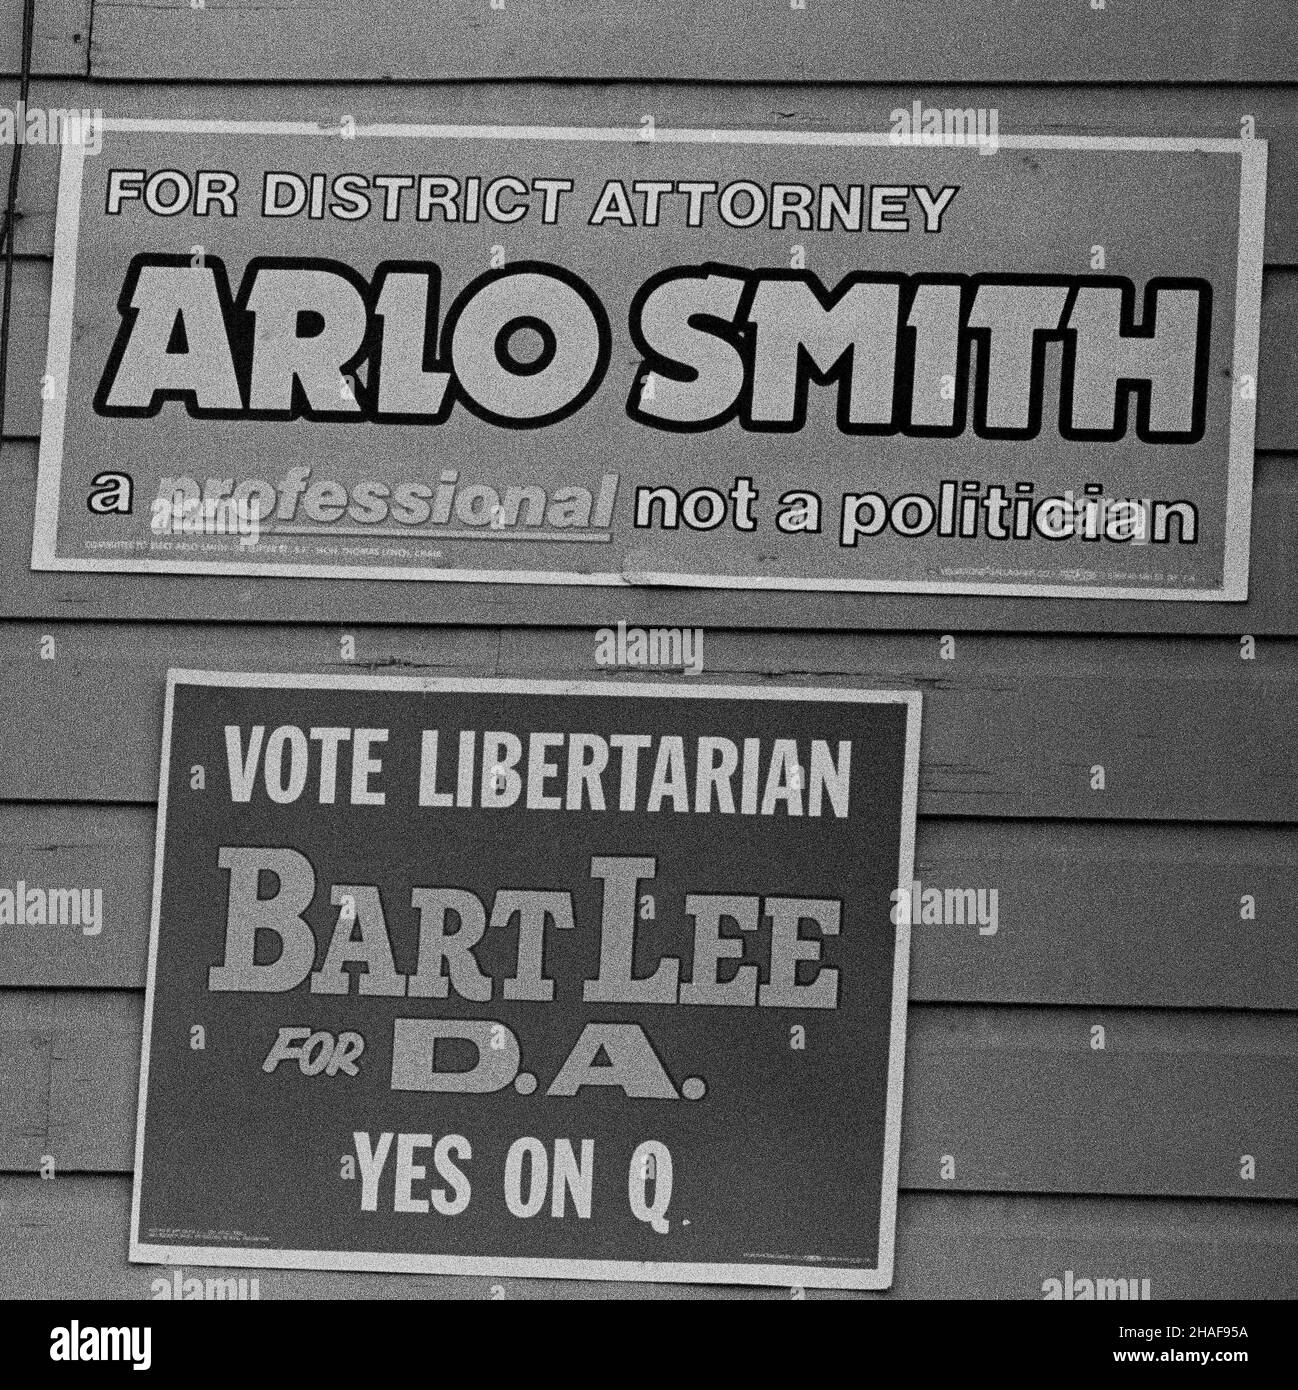 Vote Libertarian, Bart Lee for DA, yes on D, and for District Attorney Arlo Smith, a professional not a politician, campaign posters on a wall in San Francisco, California, 1970s Stock Photo